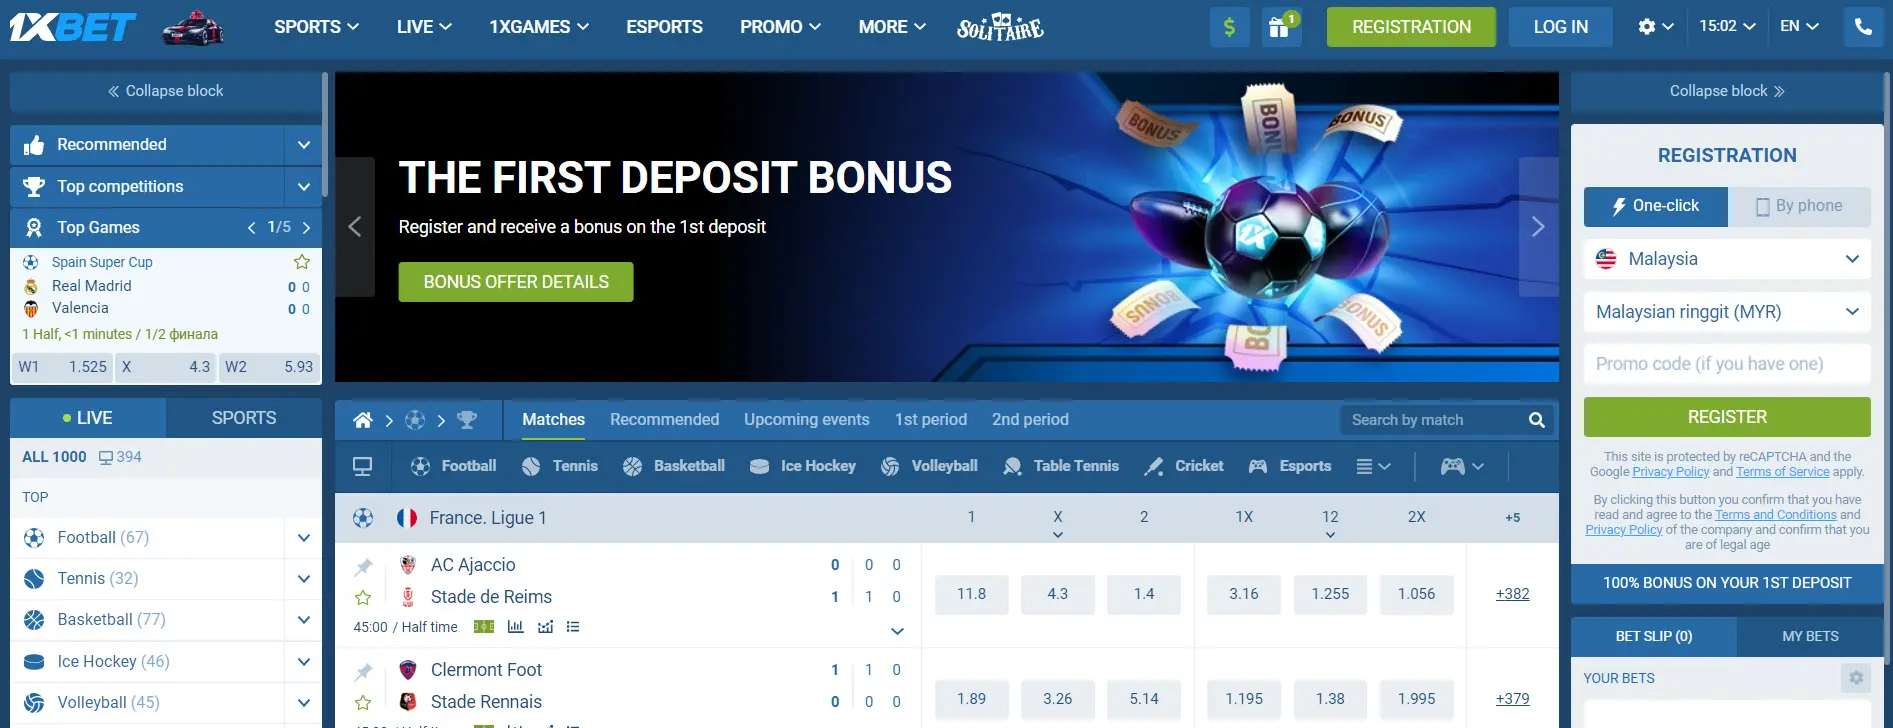 Sexy People Do online betting Malaysia :)